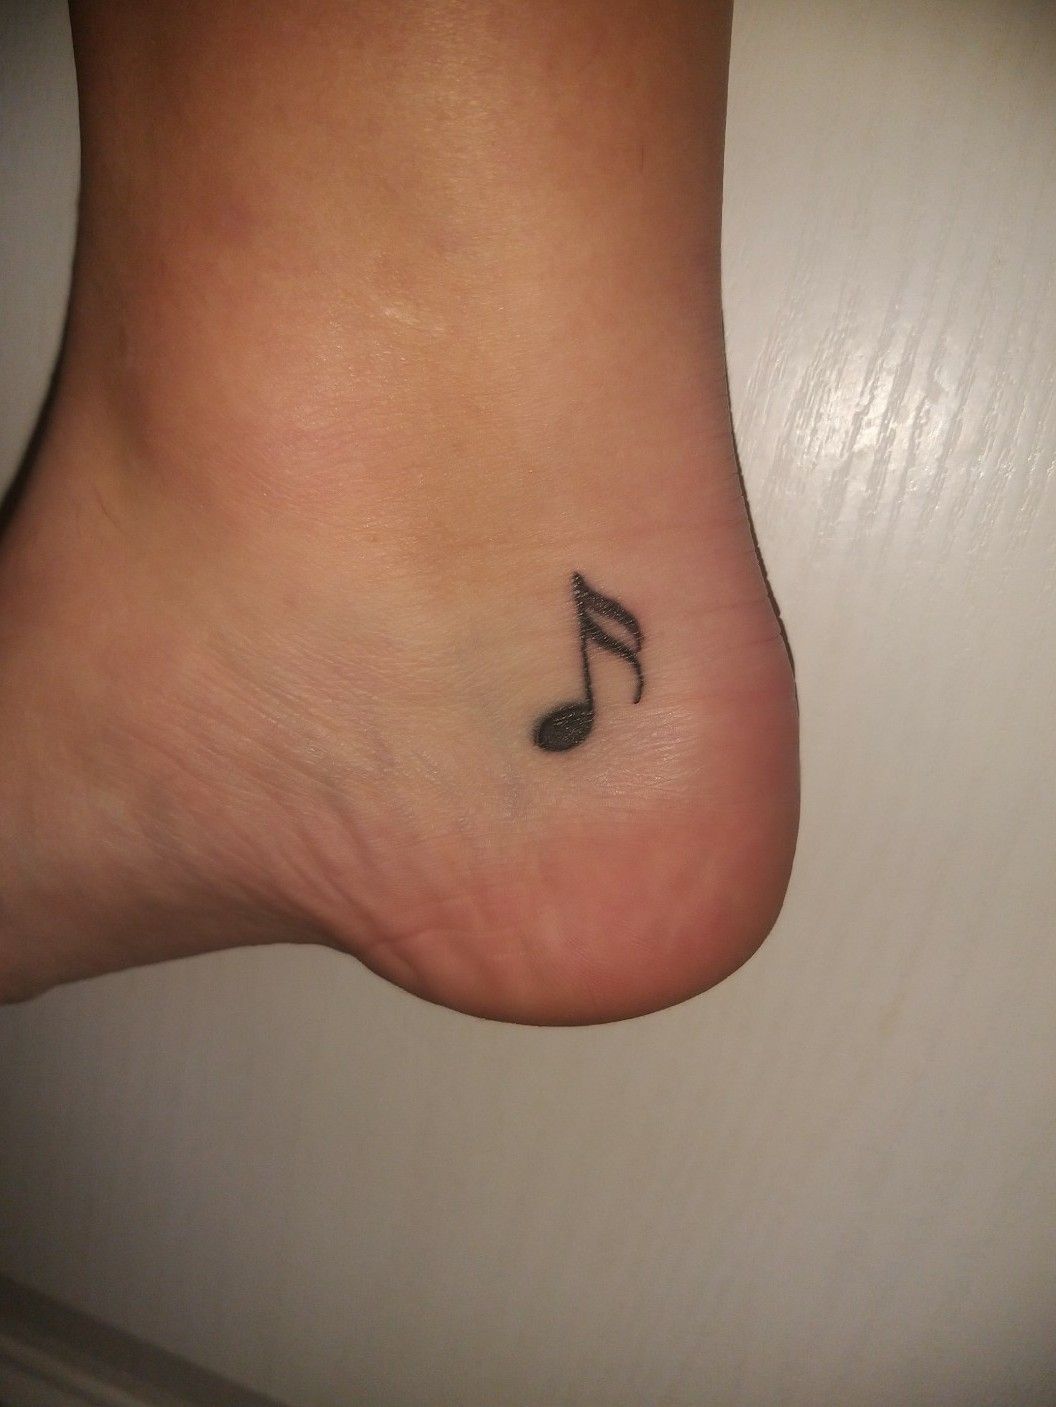 Music notes anklet tattoo. Sooo cool and simple. | Music tattoo designs, Music  tattoos, Music notes tattoo